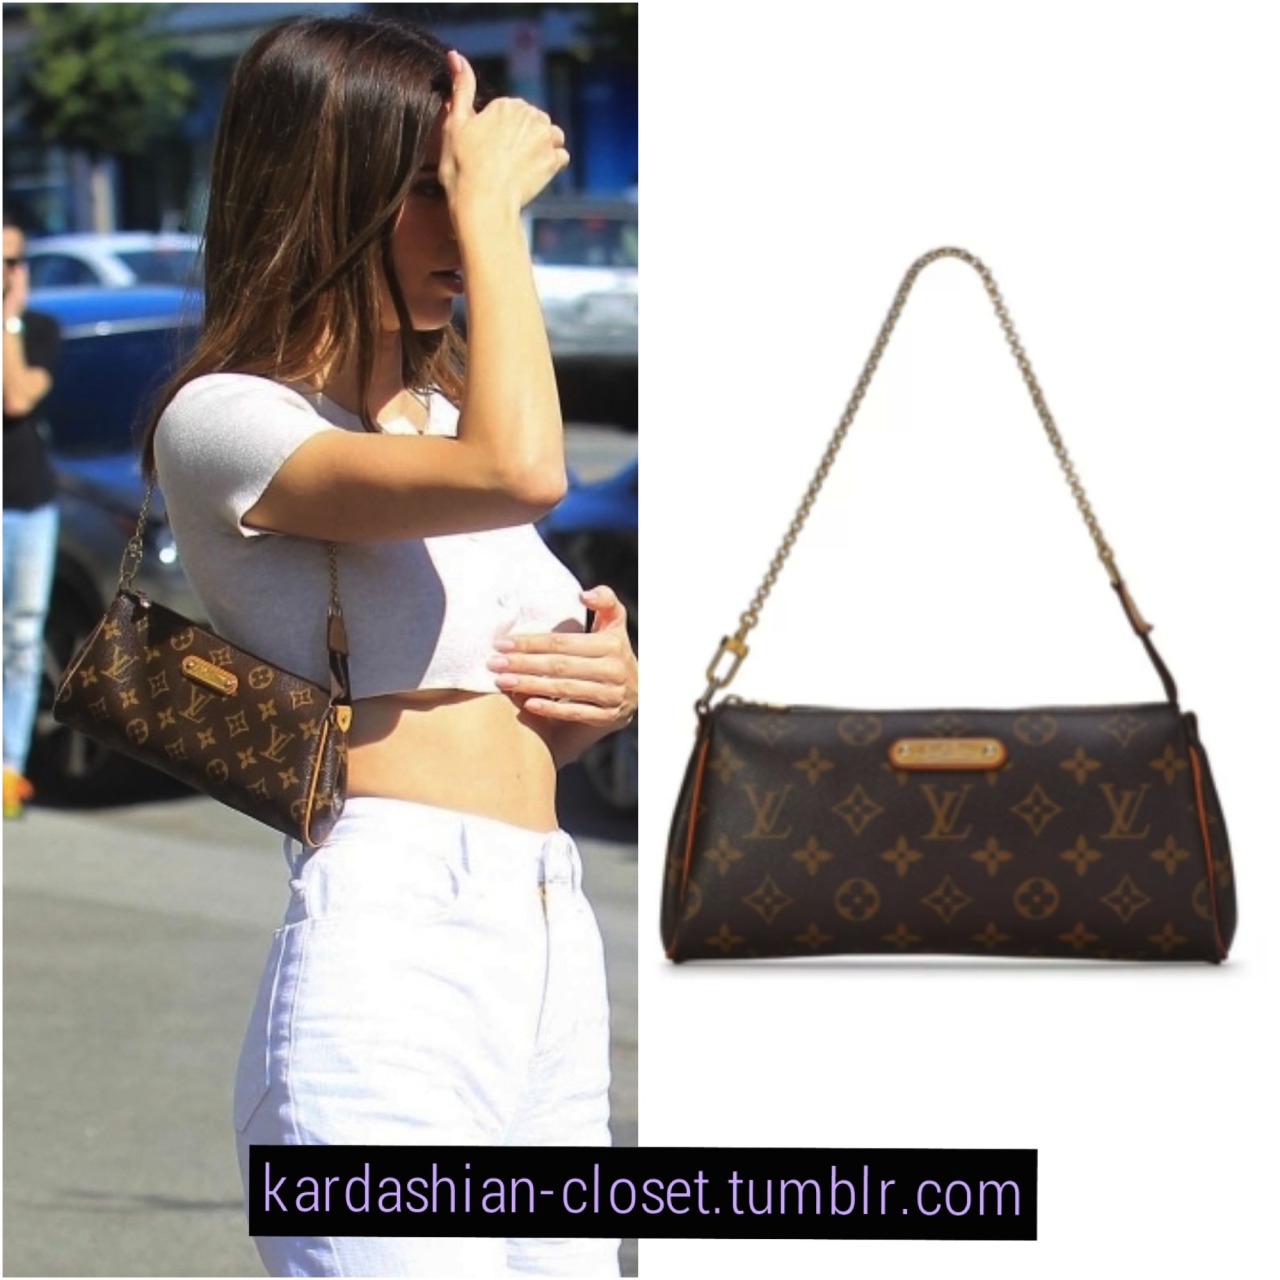 Kendall Jenner Swaps Her Vintage Louis Vuitton Bags For A